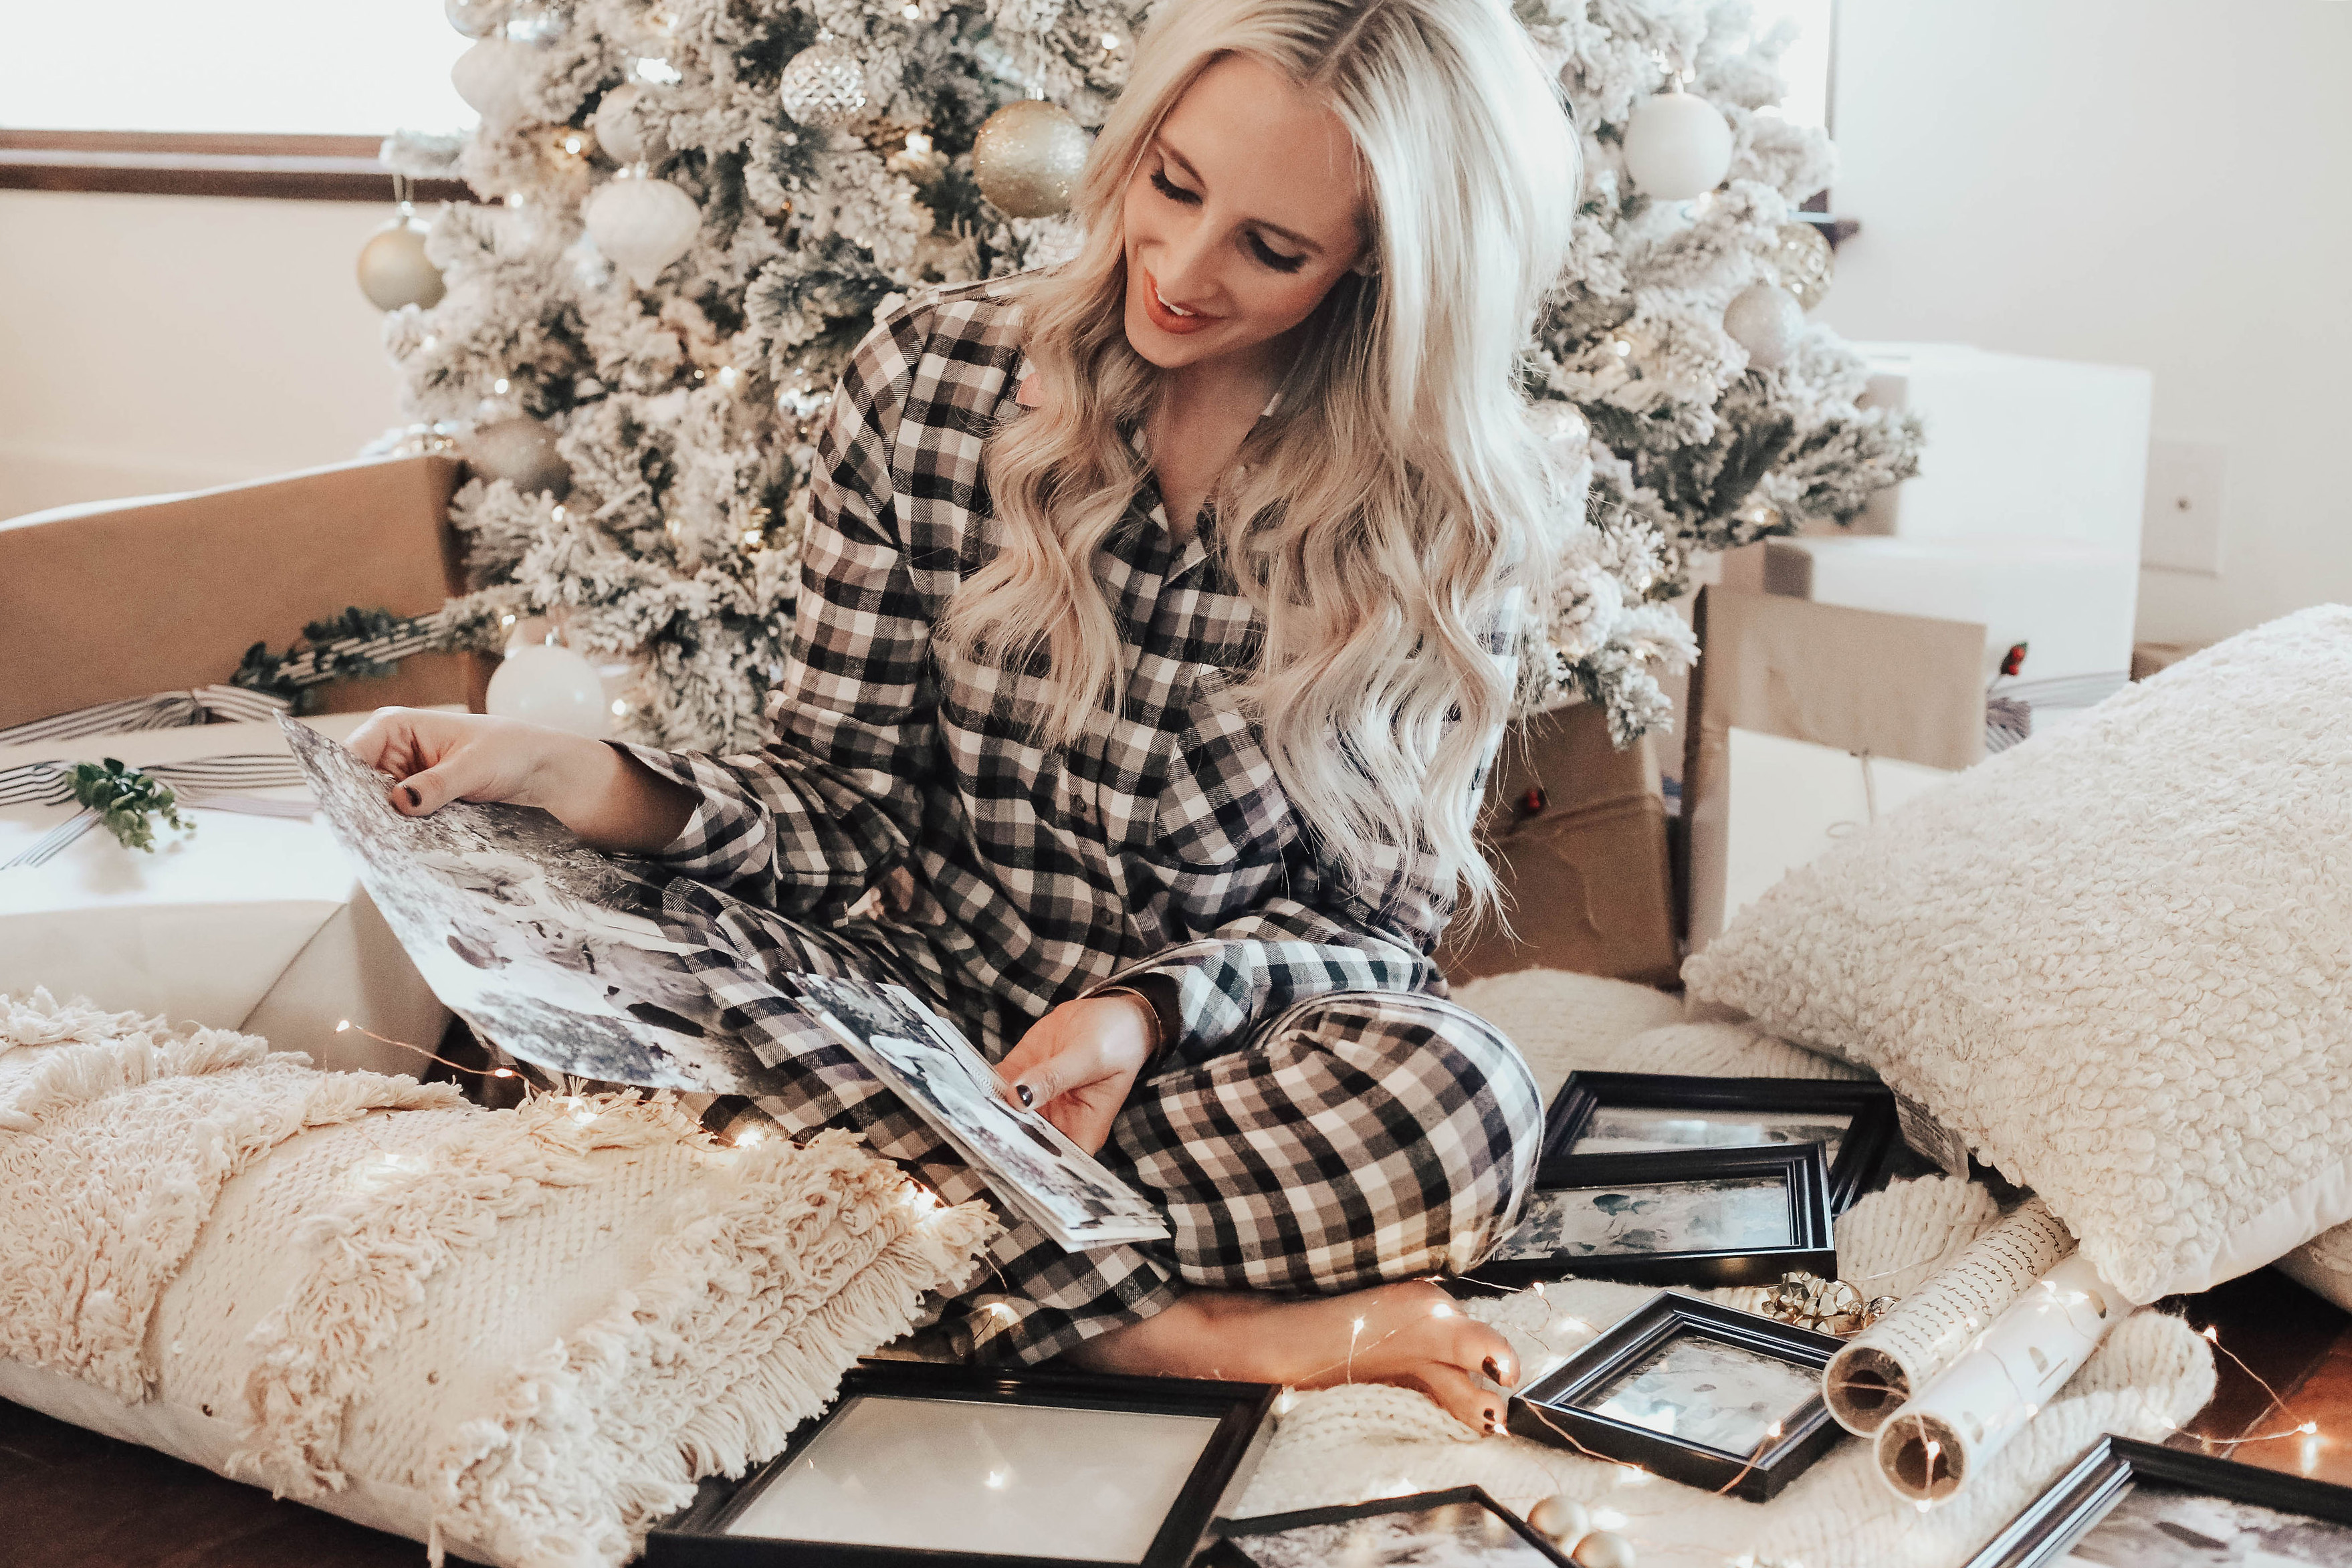 Reno Nevada blogger, Emily Farren Wieczorek shares how she makes personal holiday photo gifts for under $10 each with the help of Walmart.